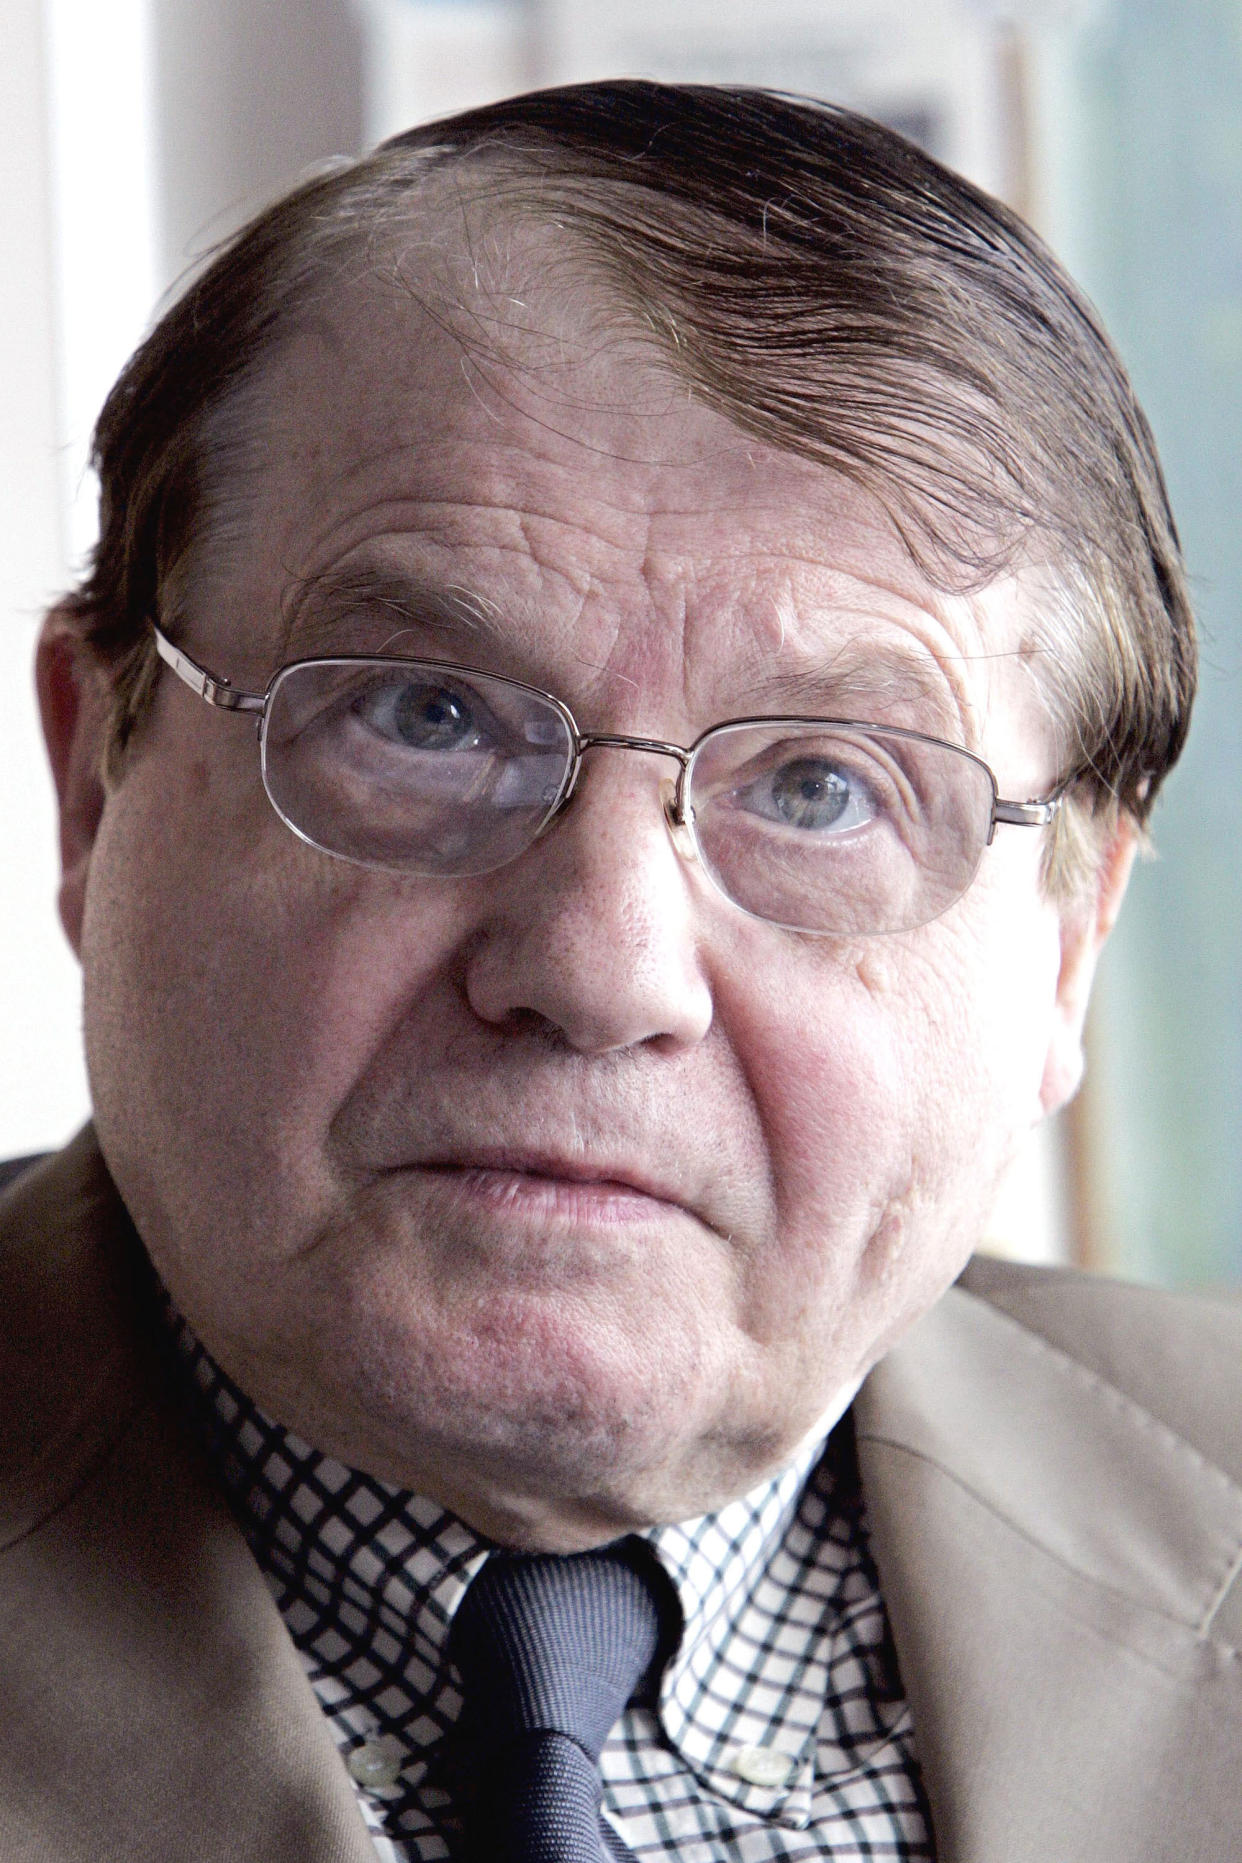 FILE - This June 5, 2006 file photo shows scientist Luc Montagnier in Paris. During an April 2020 interview with the French news channel C News, Montagnier claimed that the coronavirus did not originate in nature and was manipulated. (AP Photo/Jacques Brinon, File)